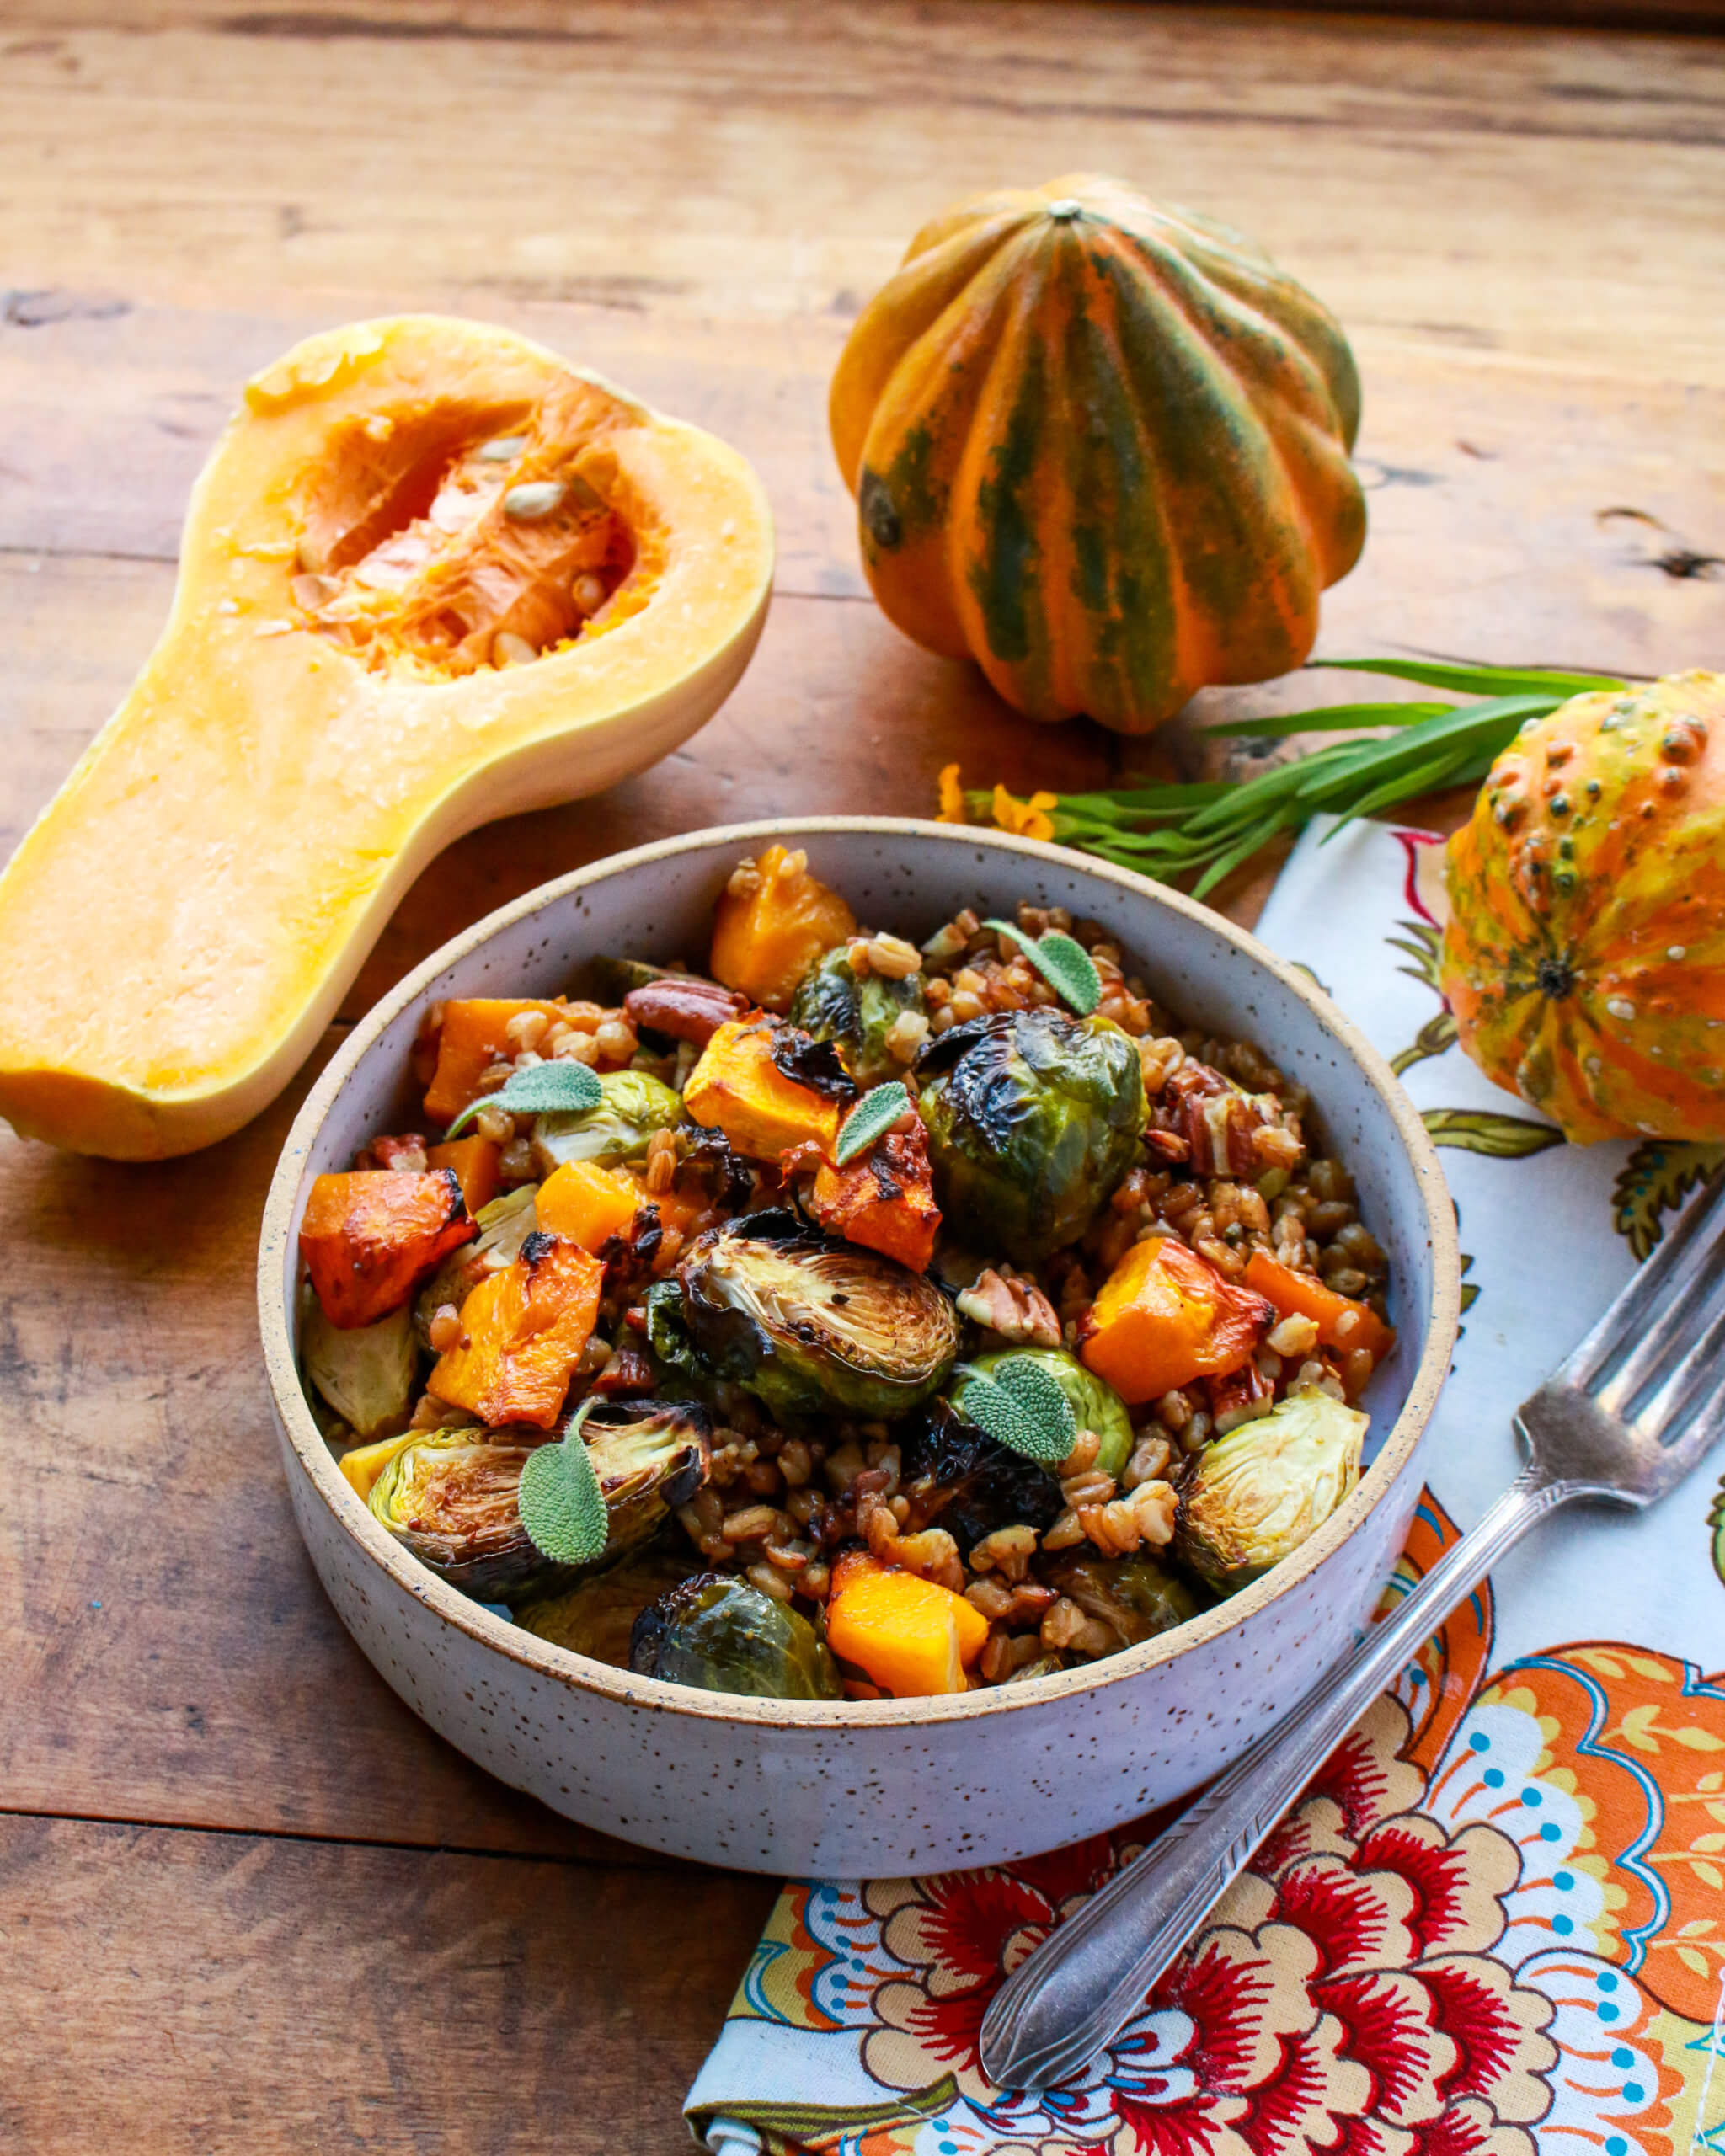 Balsamic Roasted Butter Squash and Brussels Sprouts with Farro